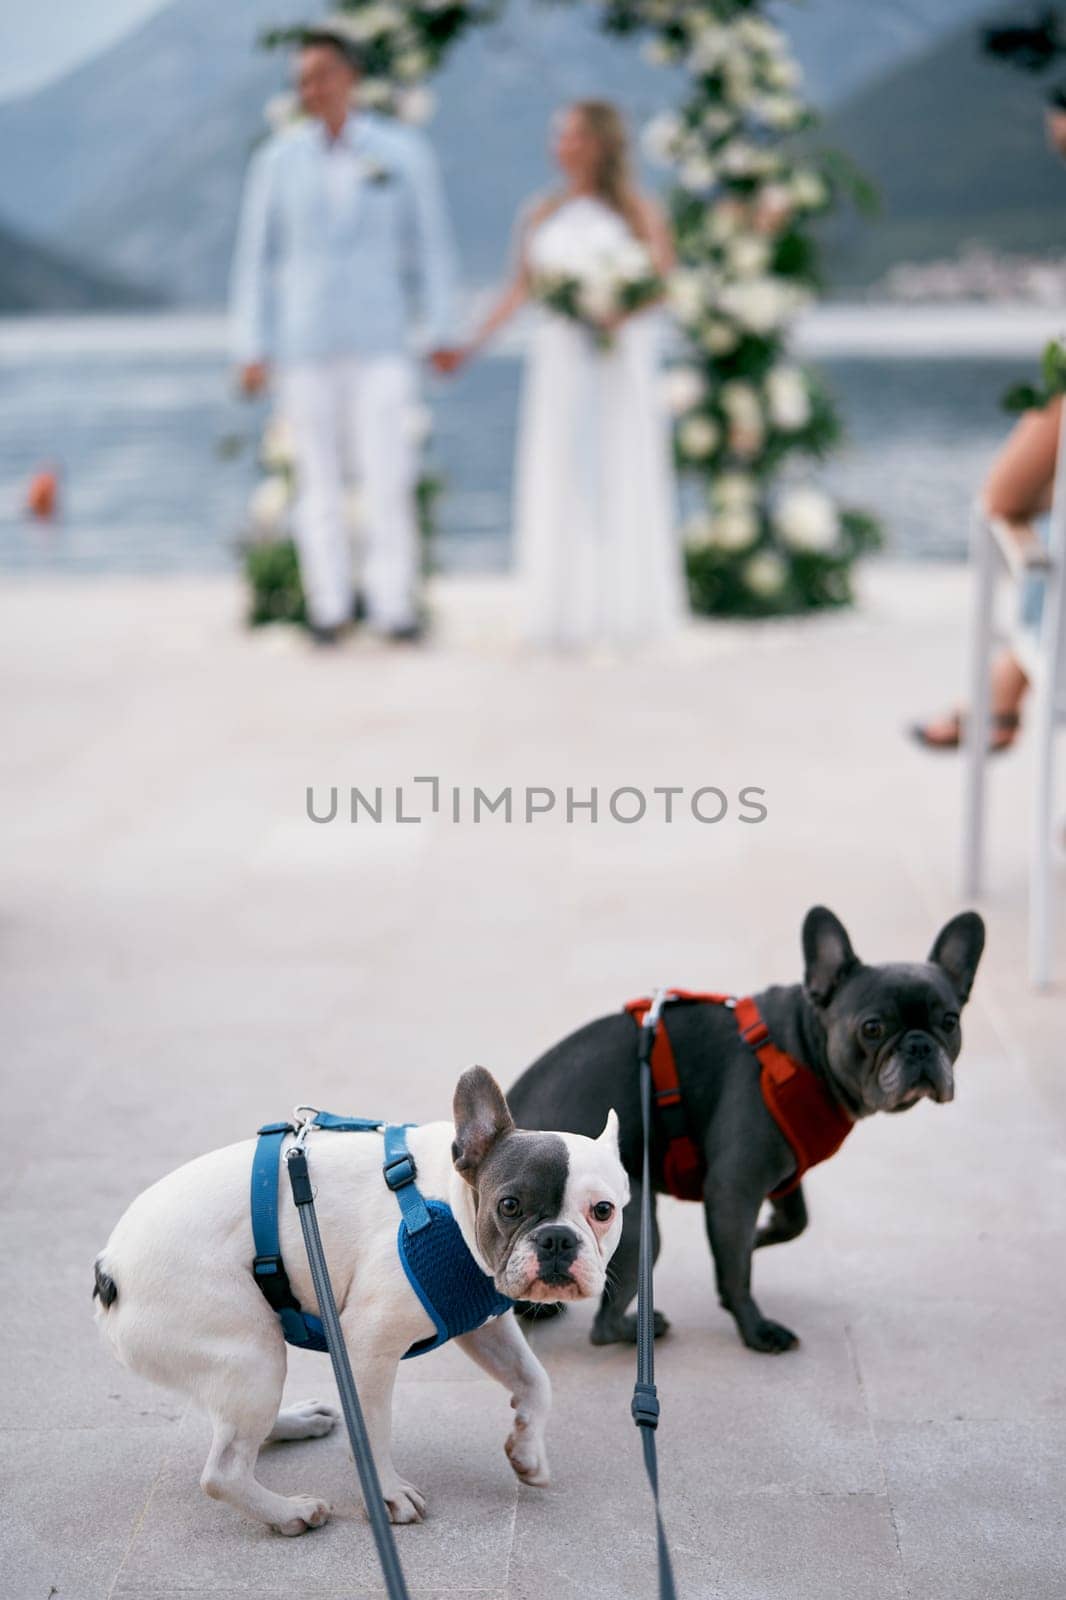 French bulldog puppies on leashes with belts sit on the ground by Nadtochiy